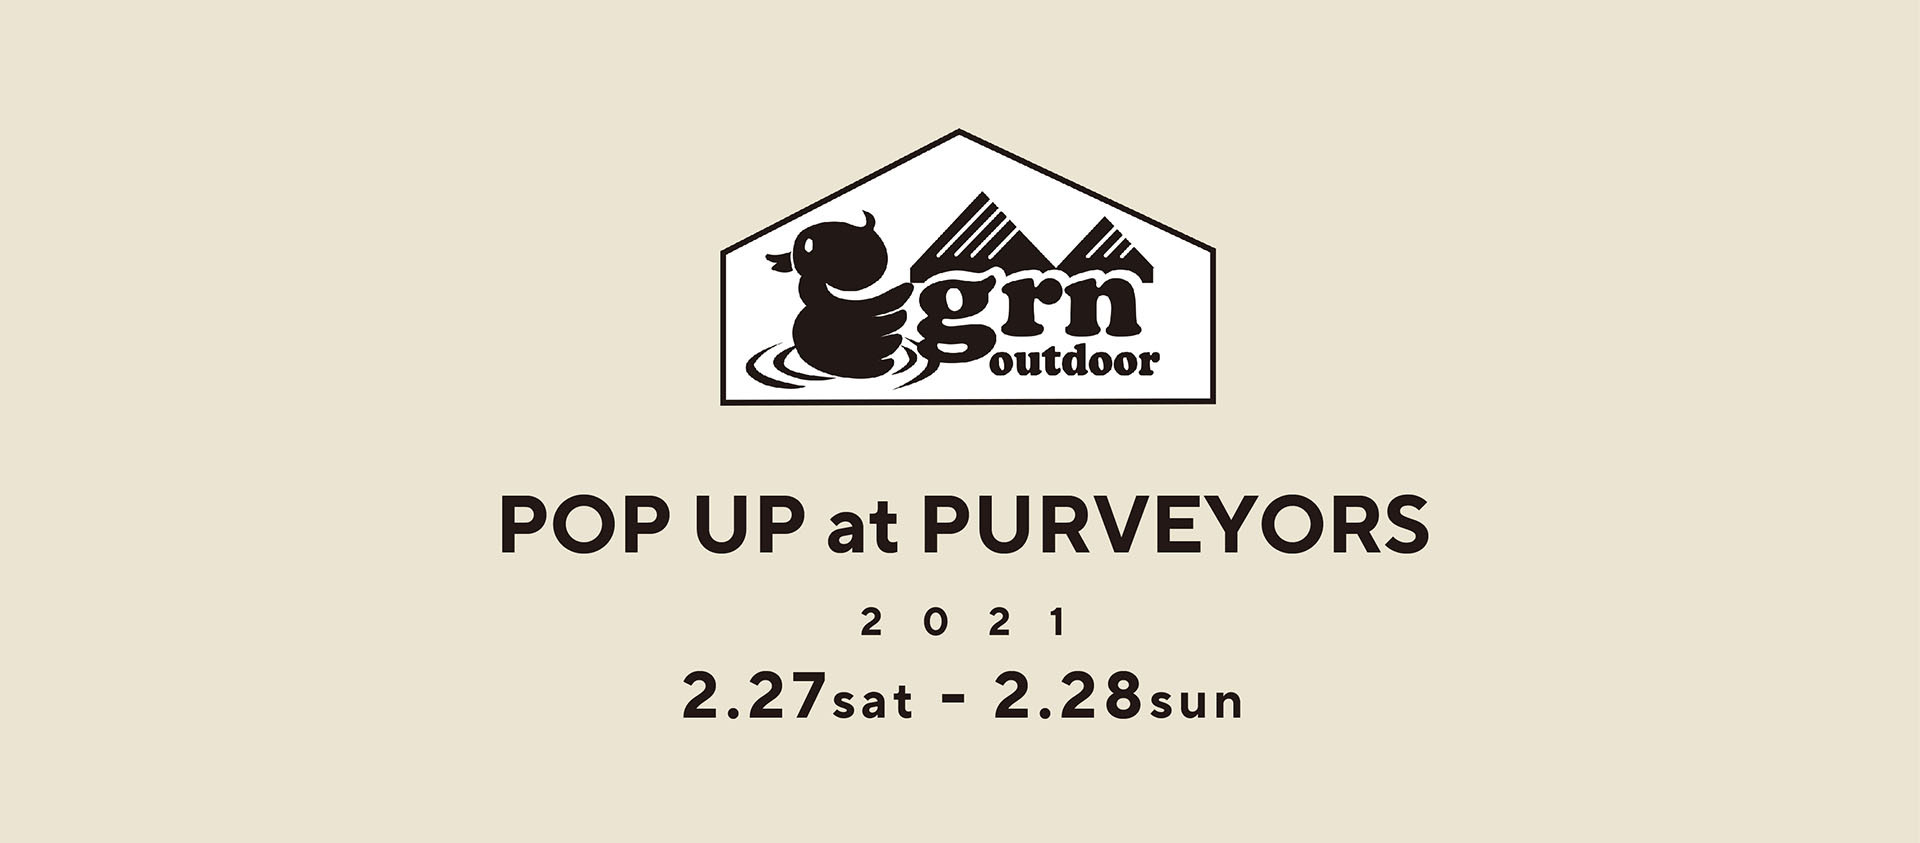 grn outdoor POP UP at Purveyors